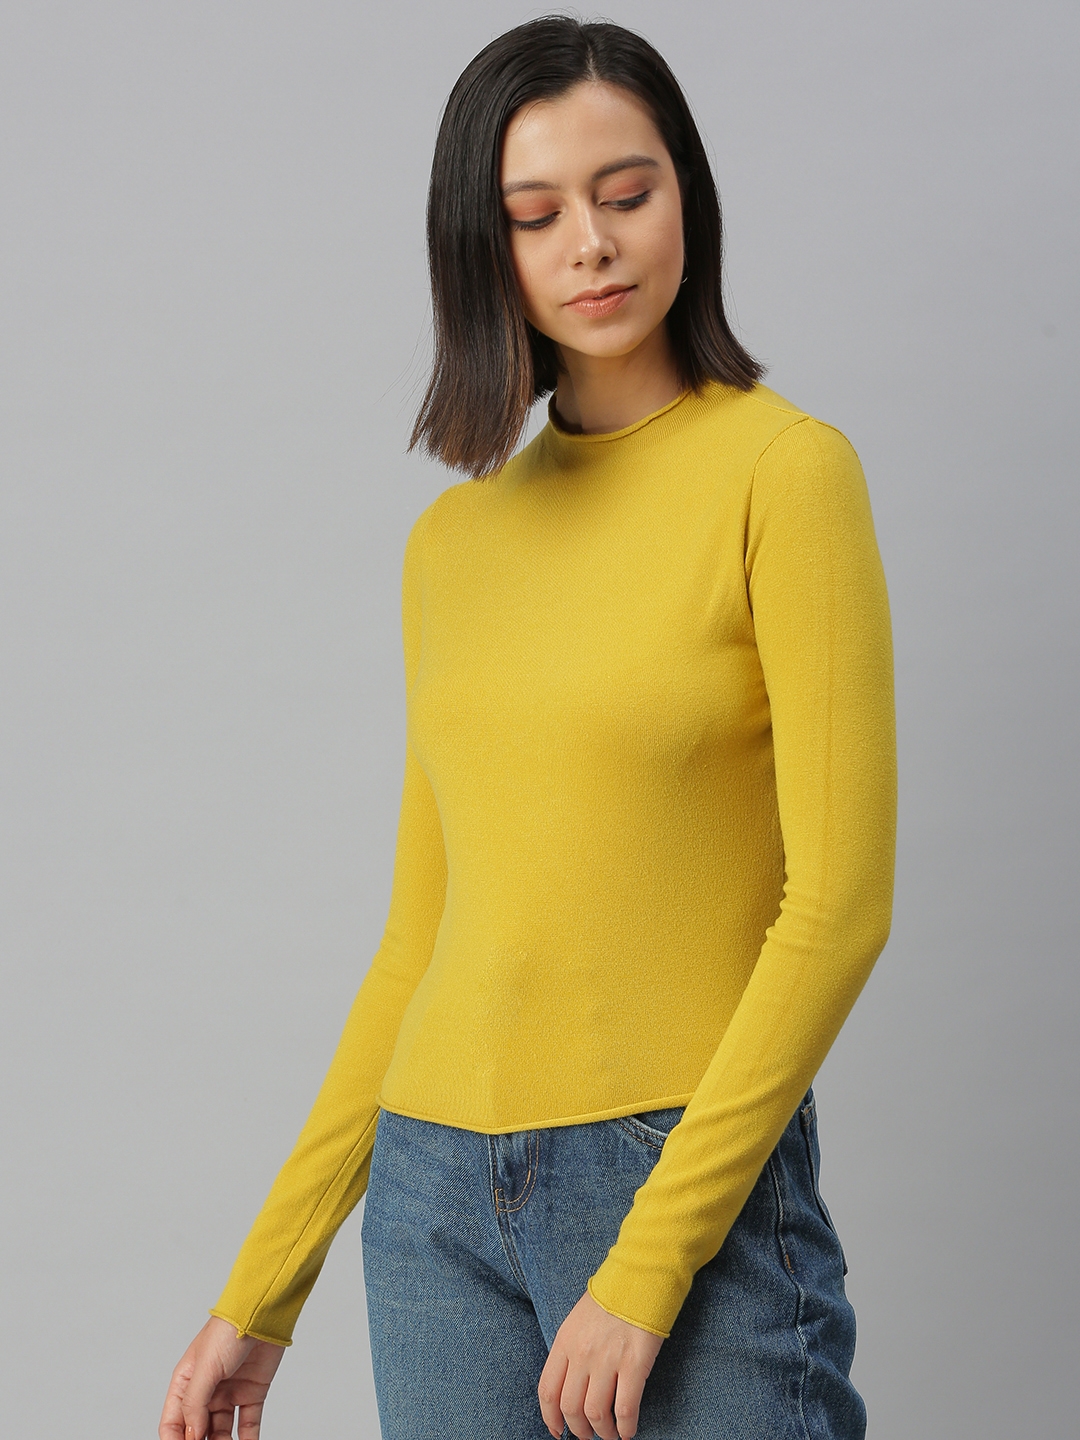 Women's Yellow Cotton Blend Solid Tops